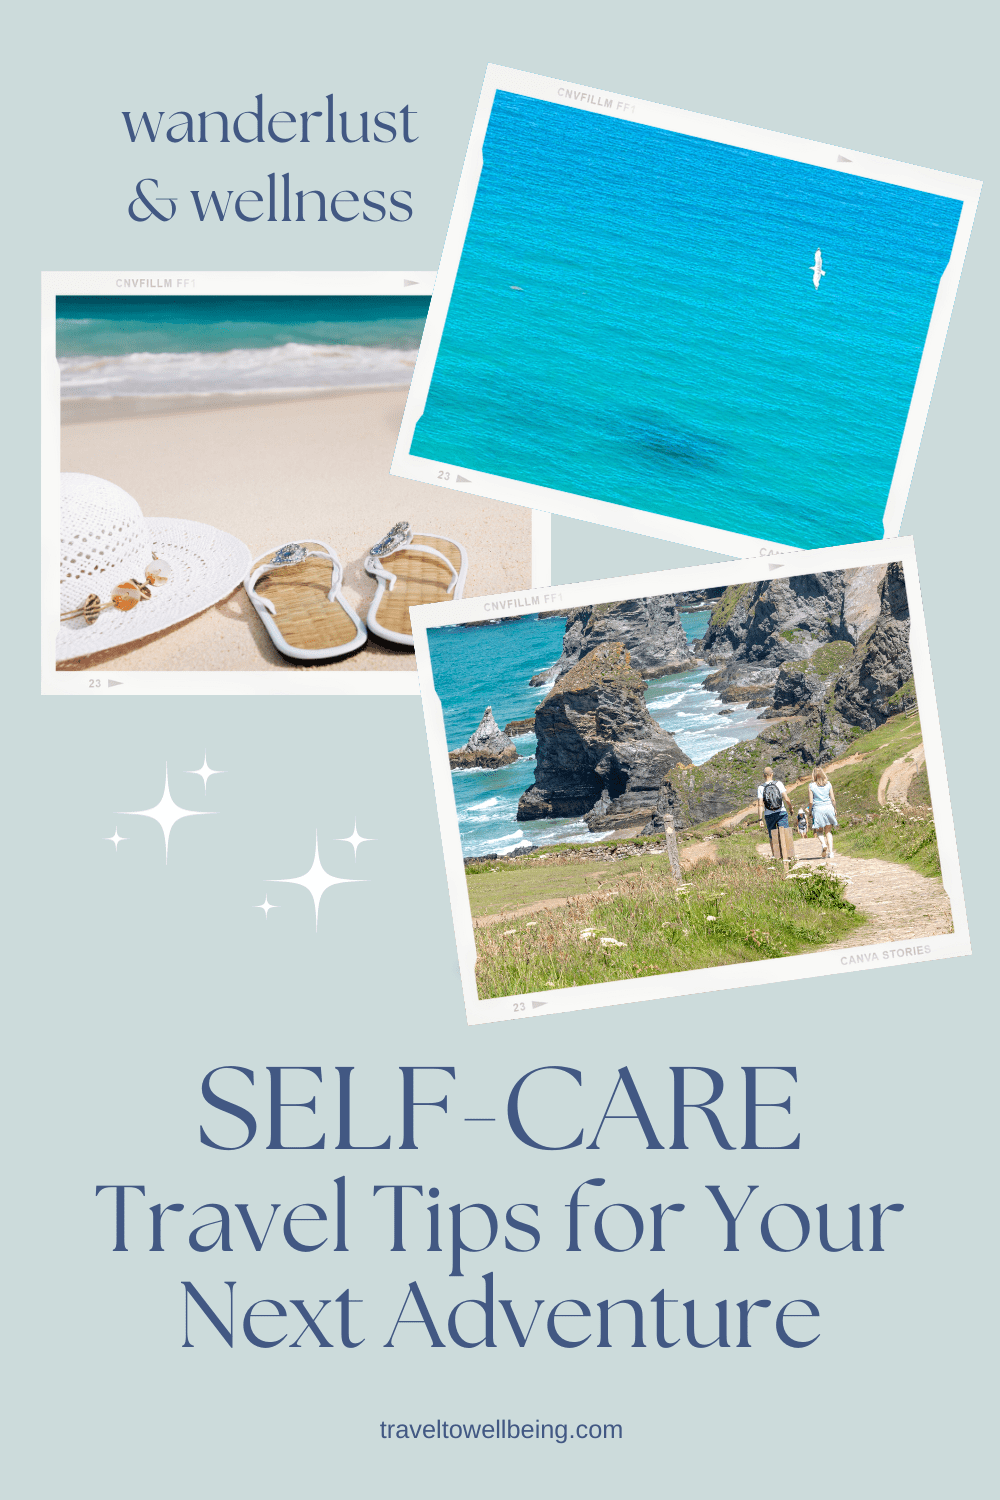 Wellness & Wanderlust: Self-Care Travel Tips for Your Next Adventure